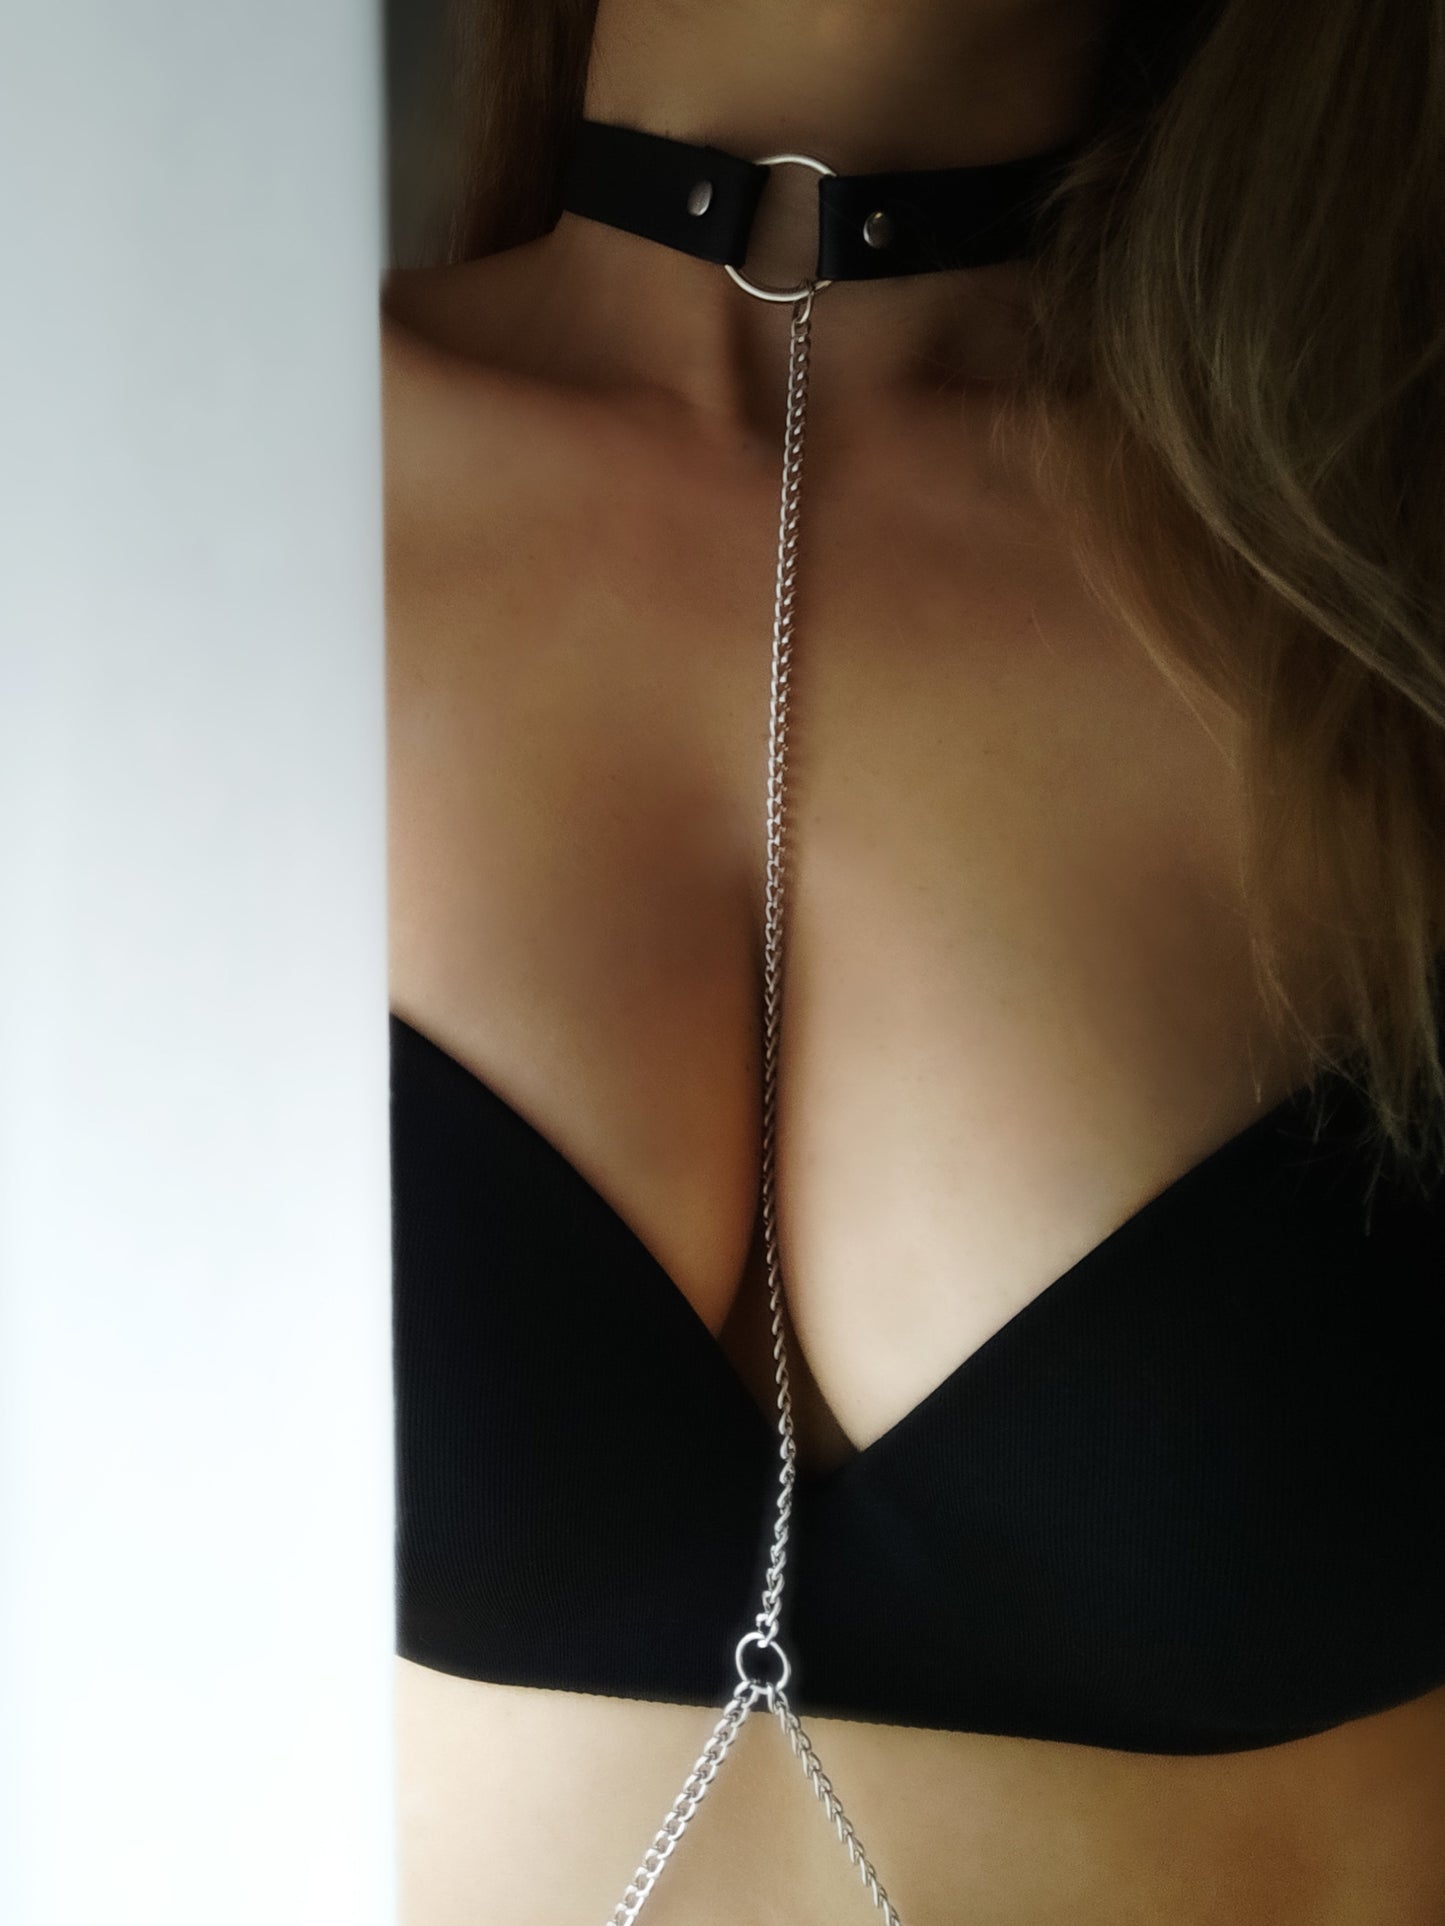 Leather Choker with Chain (Leash)